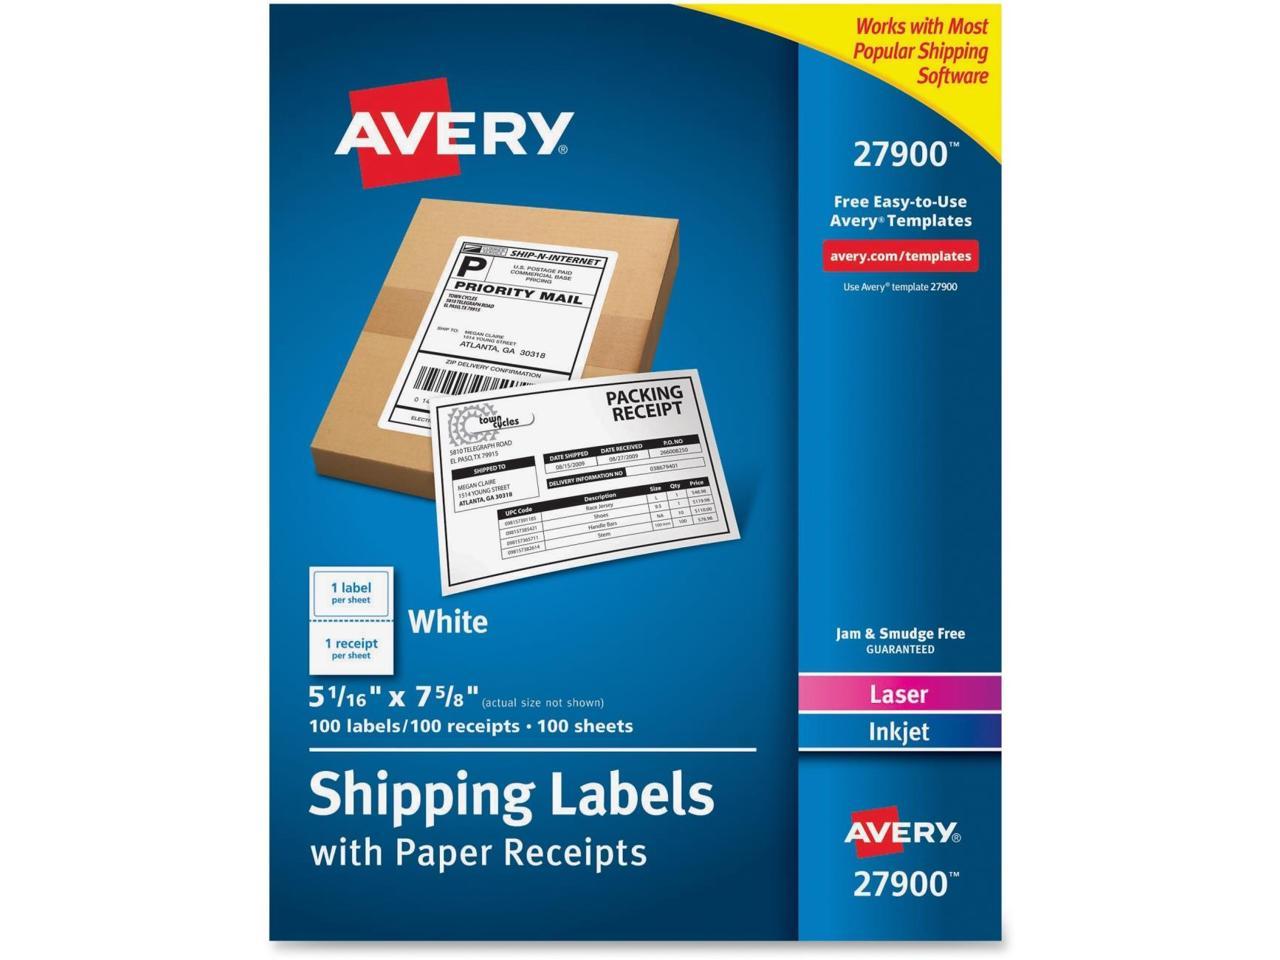 avery-paper-receipt-white-shipping-labels-newegg